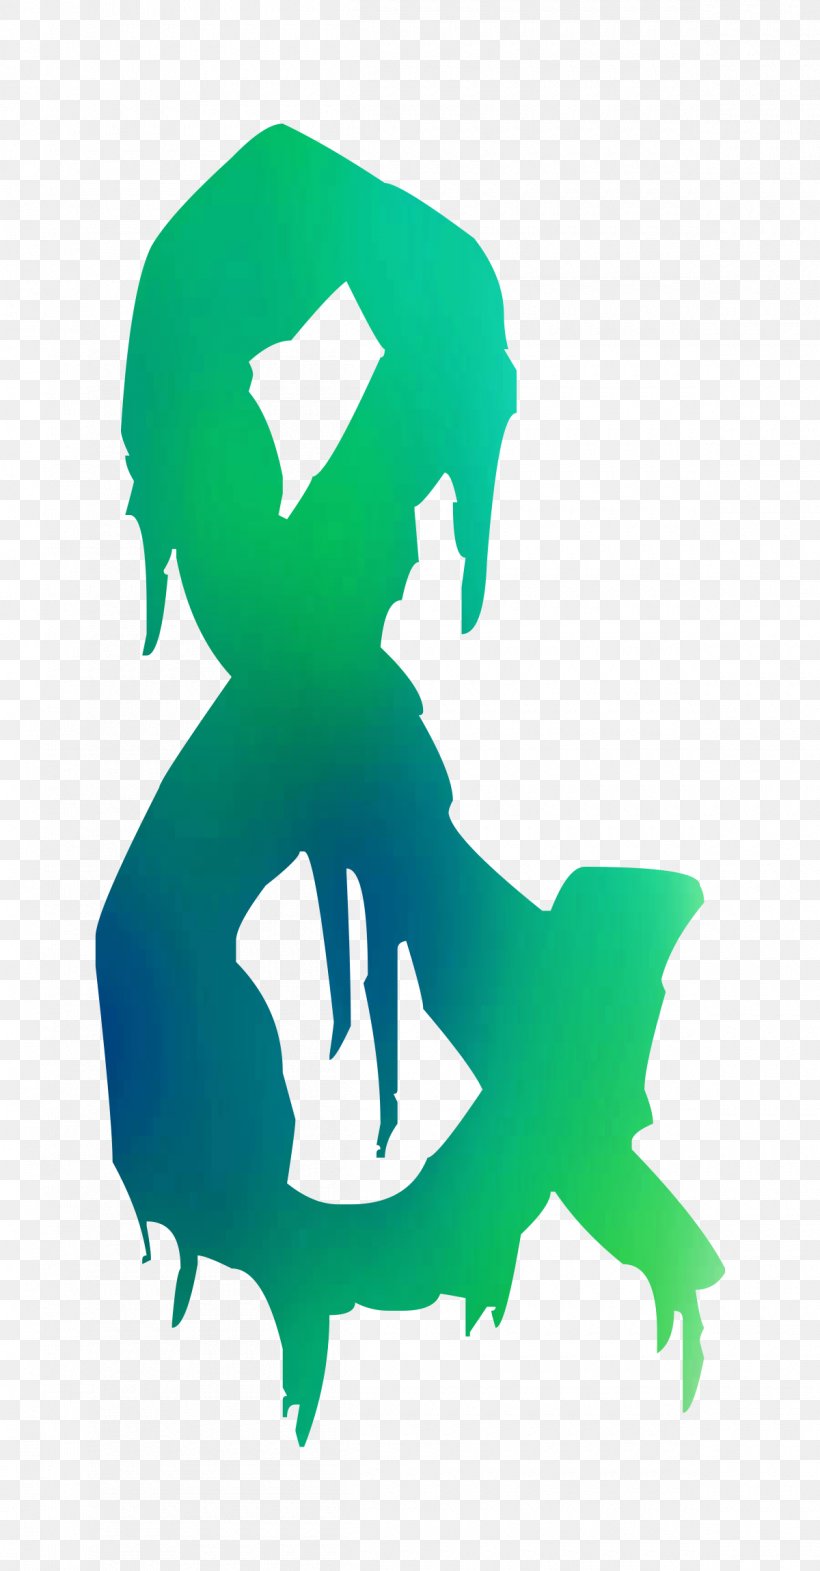 Illustration Clip Art Product Design Silhouette, PNG, 1200x2300px, Silhouette, Character, Fiction, Green Download Free